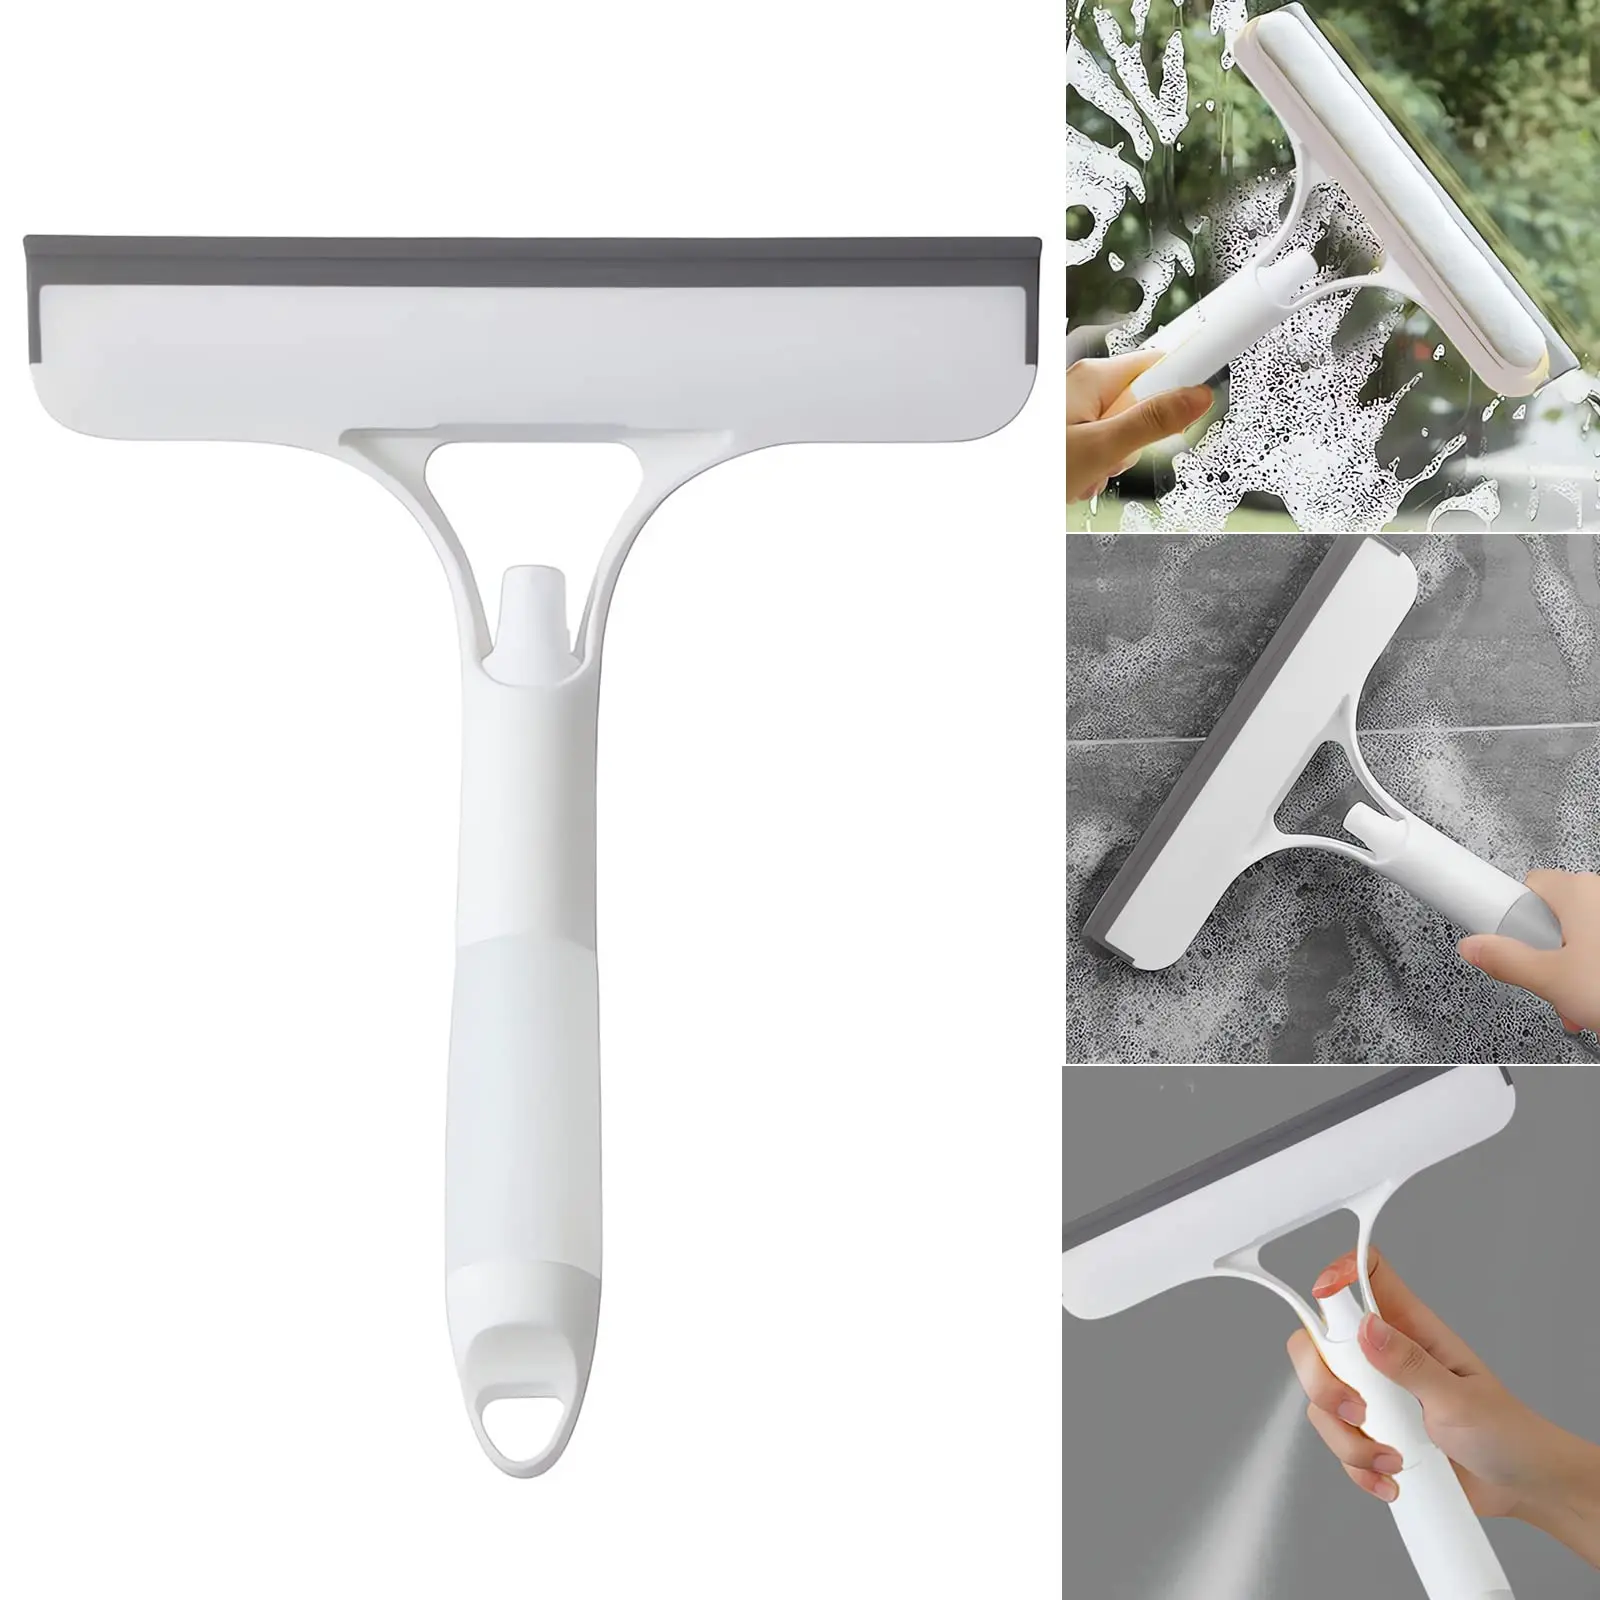 3 In 1 Window Glass Squeegee Multifunctional Cleaning Tools with Sponges  and Spray Car Windshield Washing Brush Tool - AliExpress